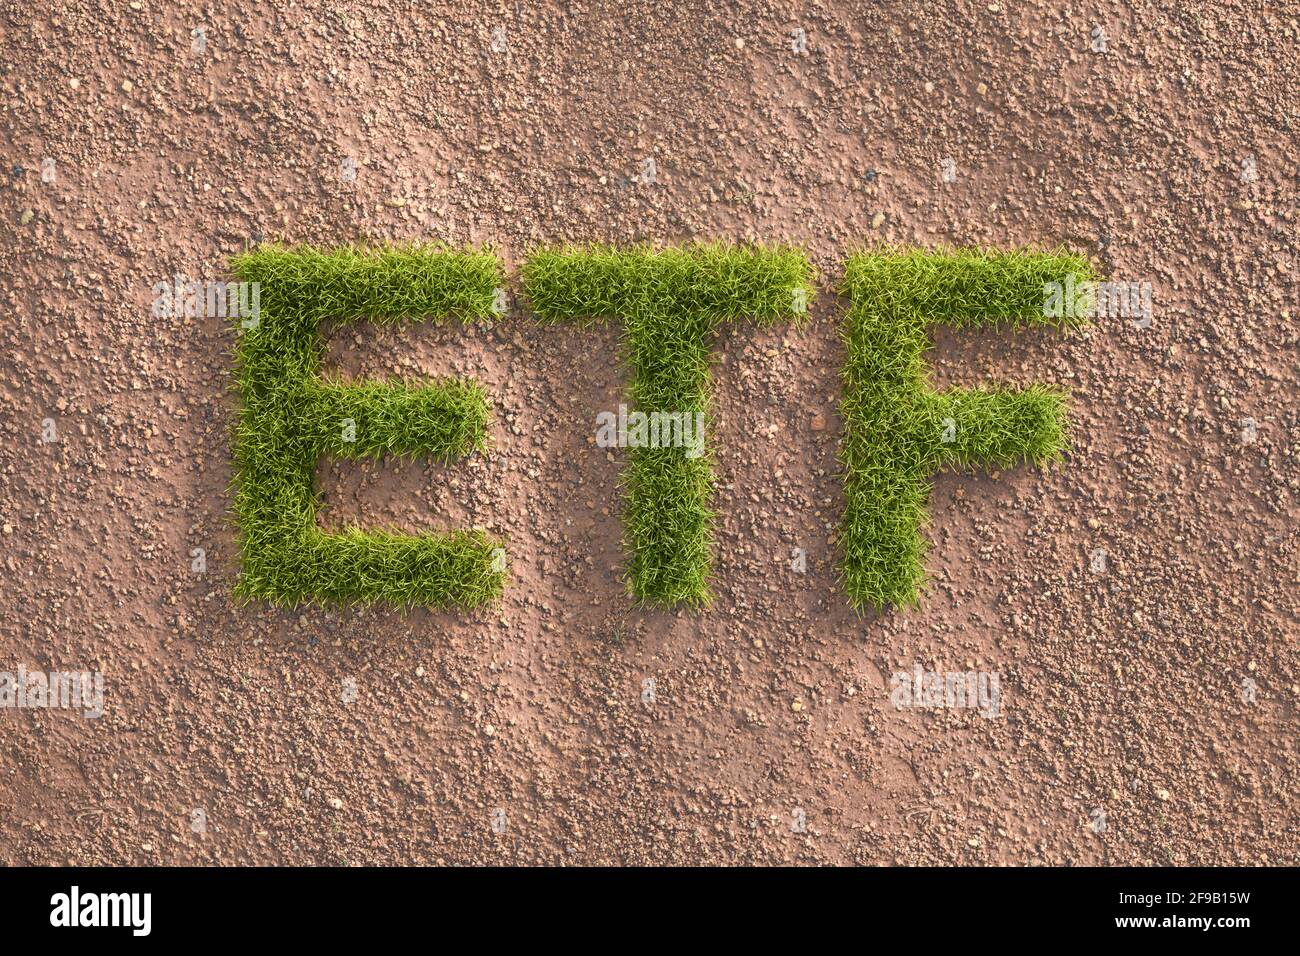 Green grass letters ETF in an arid landscape. Concept for  Exchange traded funds investing by ESG standards (environment social governance). Stock Photo